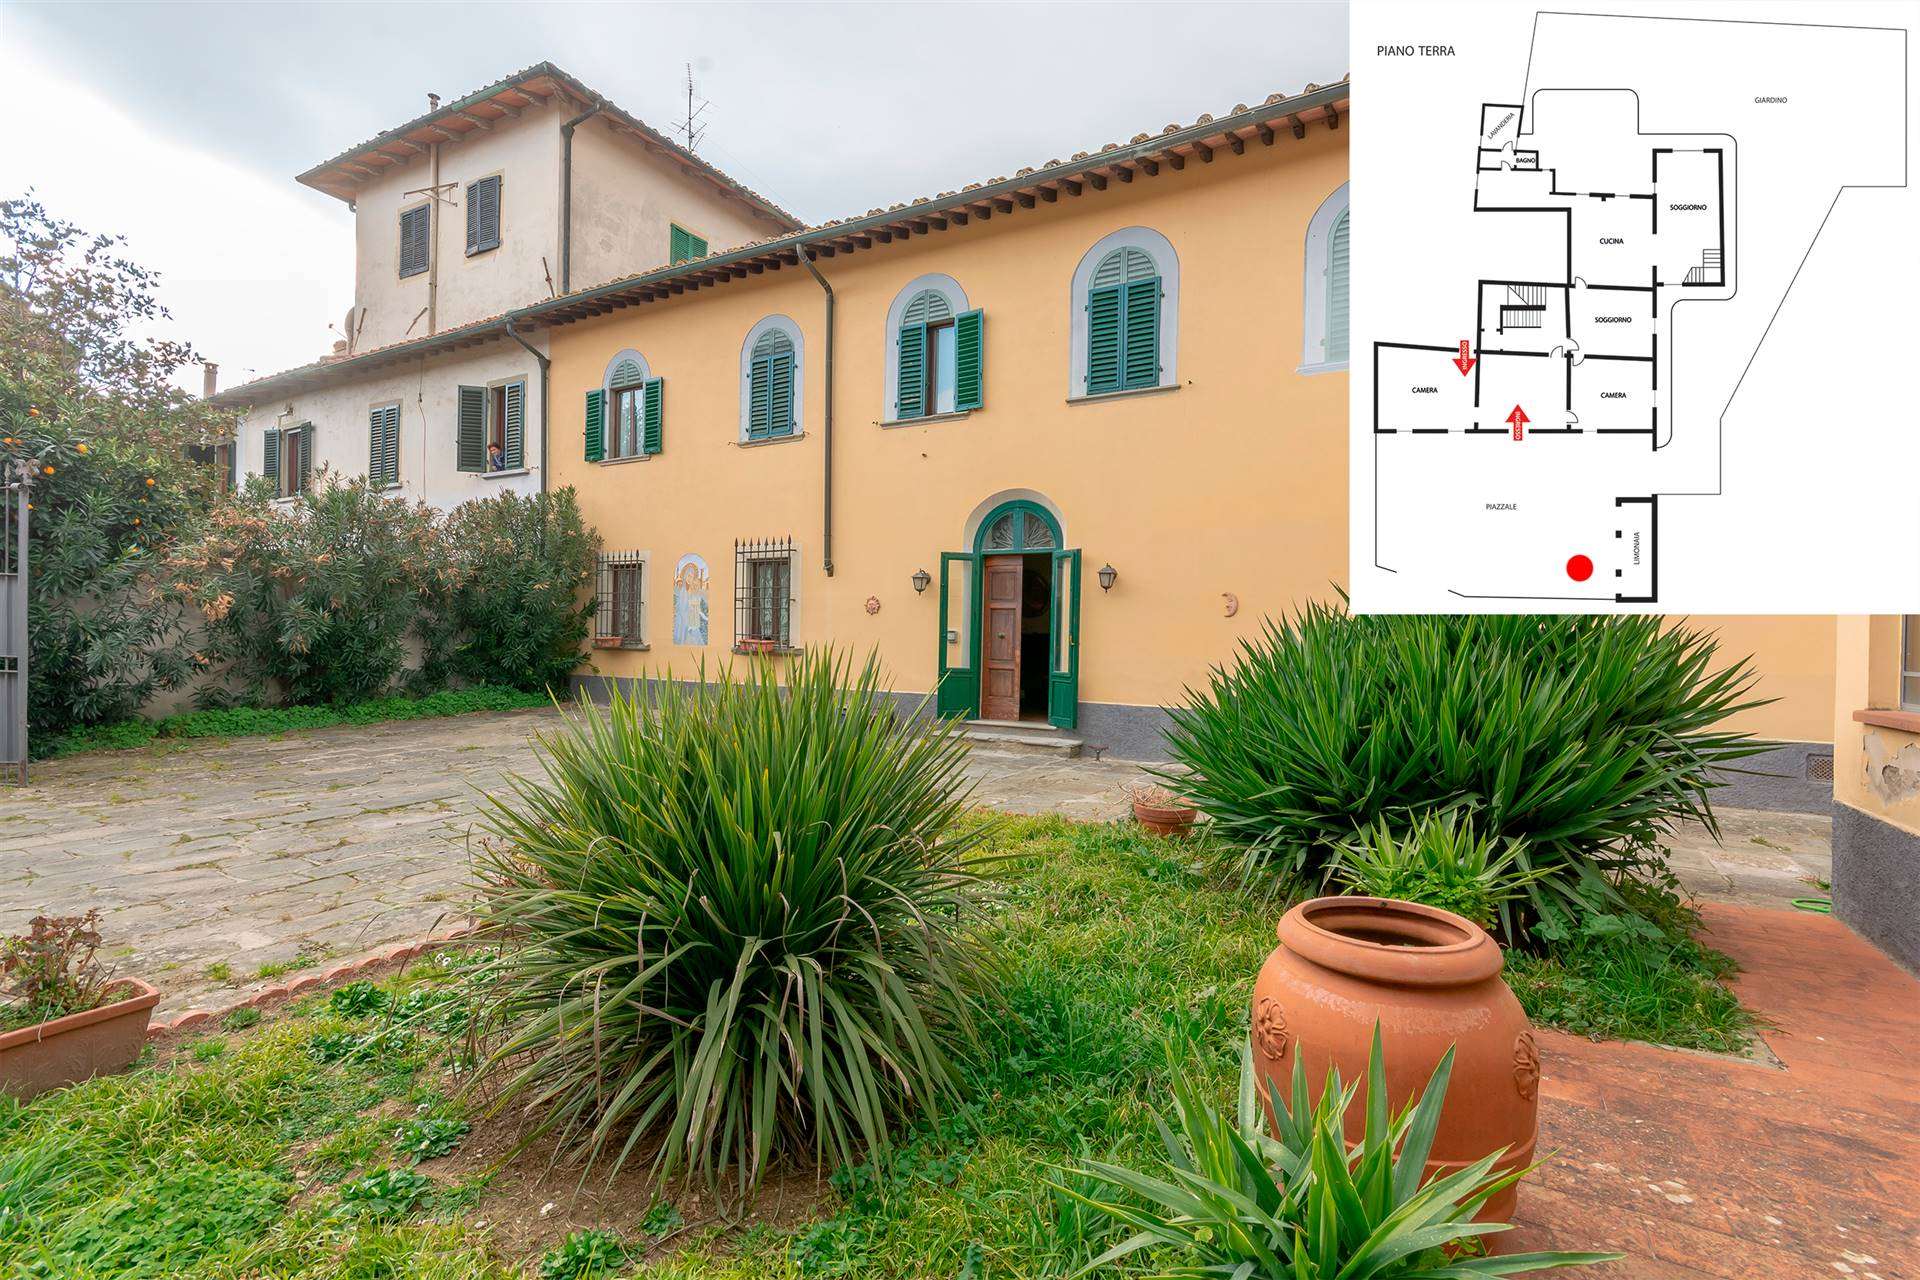 SAN DONNINO, CAMPI BISENZIO, Terraced house for sale of 480 Sq. mt., Habitable, Heating Individual heating system, Energetic class: G, placed at 